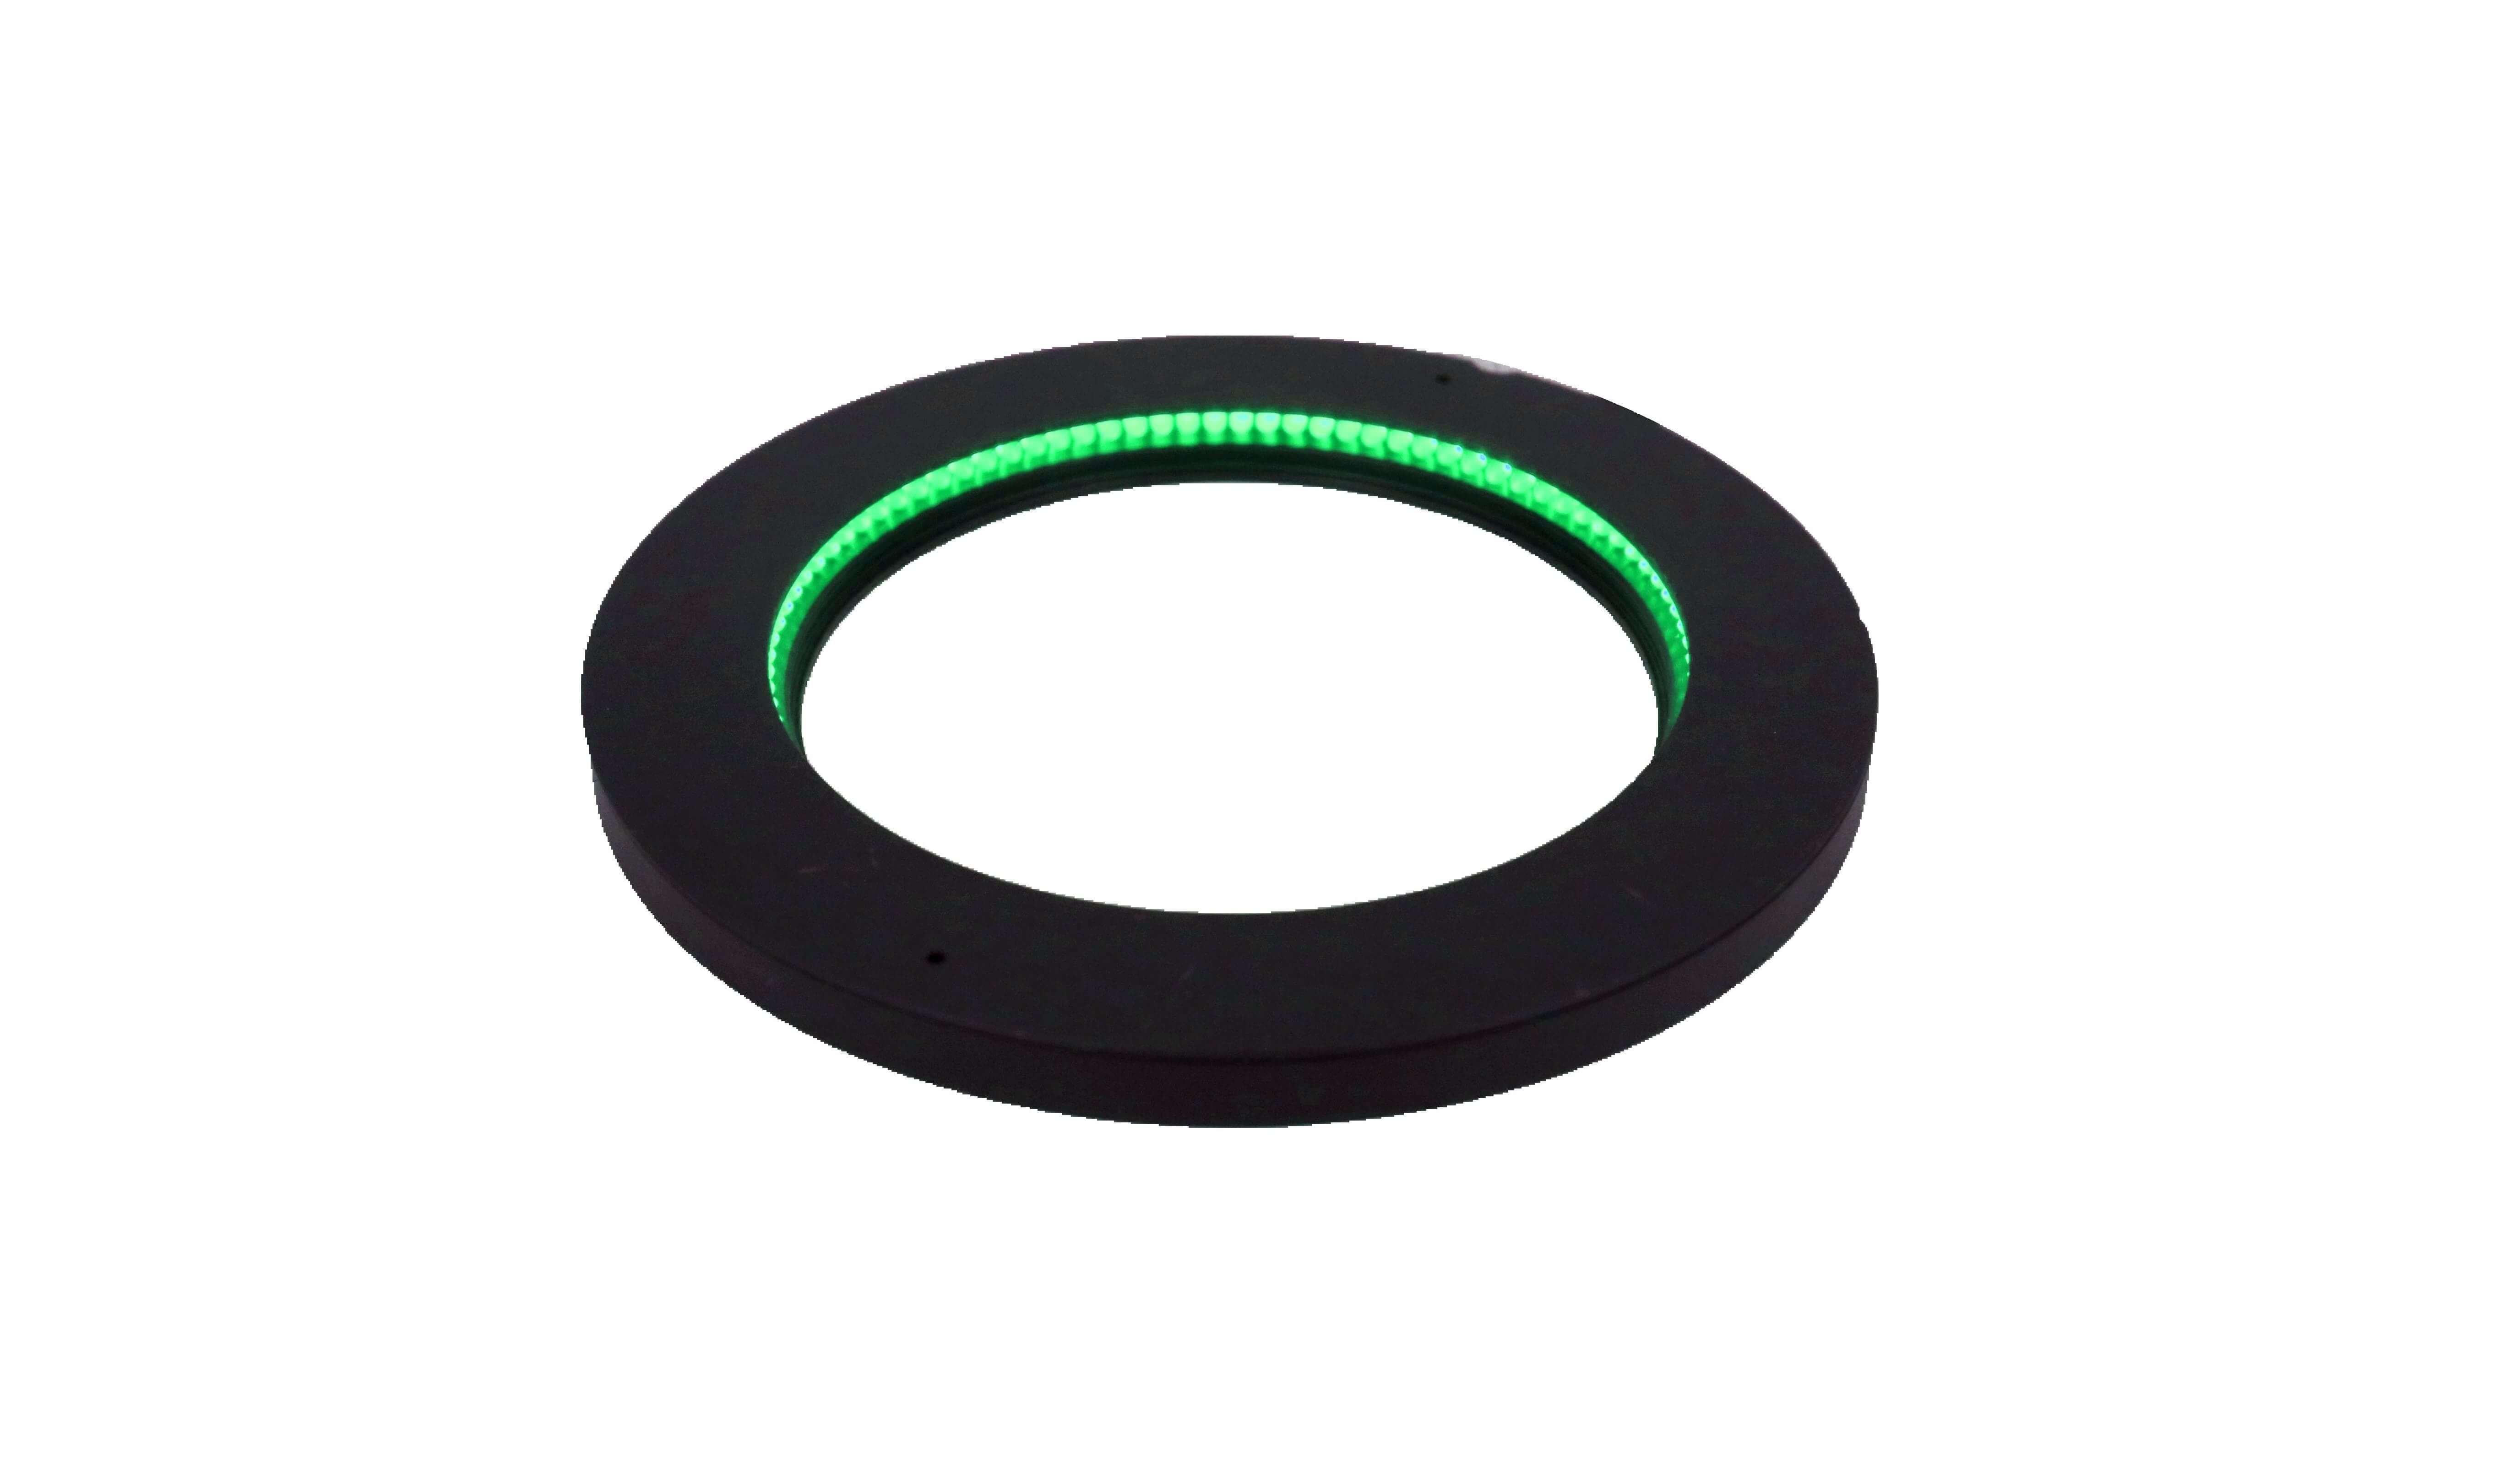 FDR-156/108 Low Angle Ring Light – Green